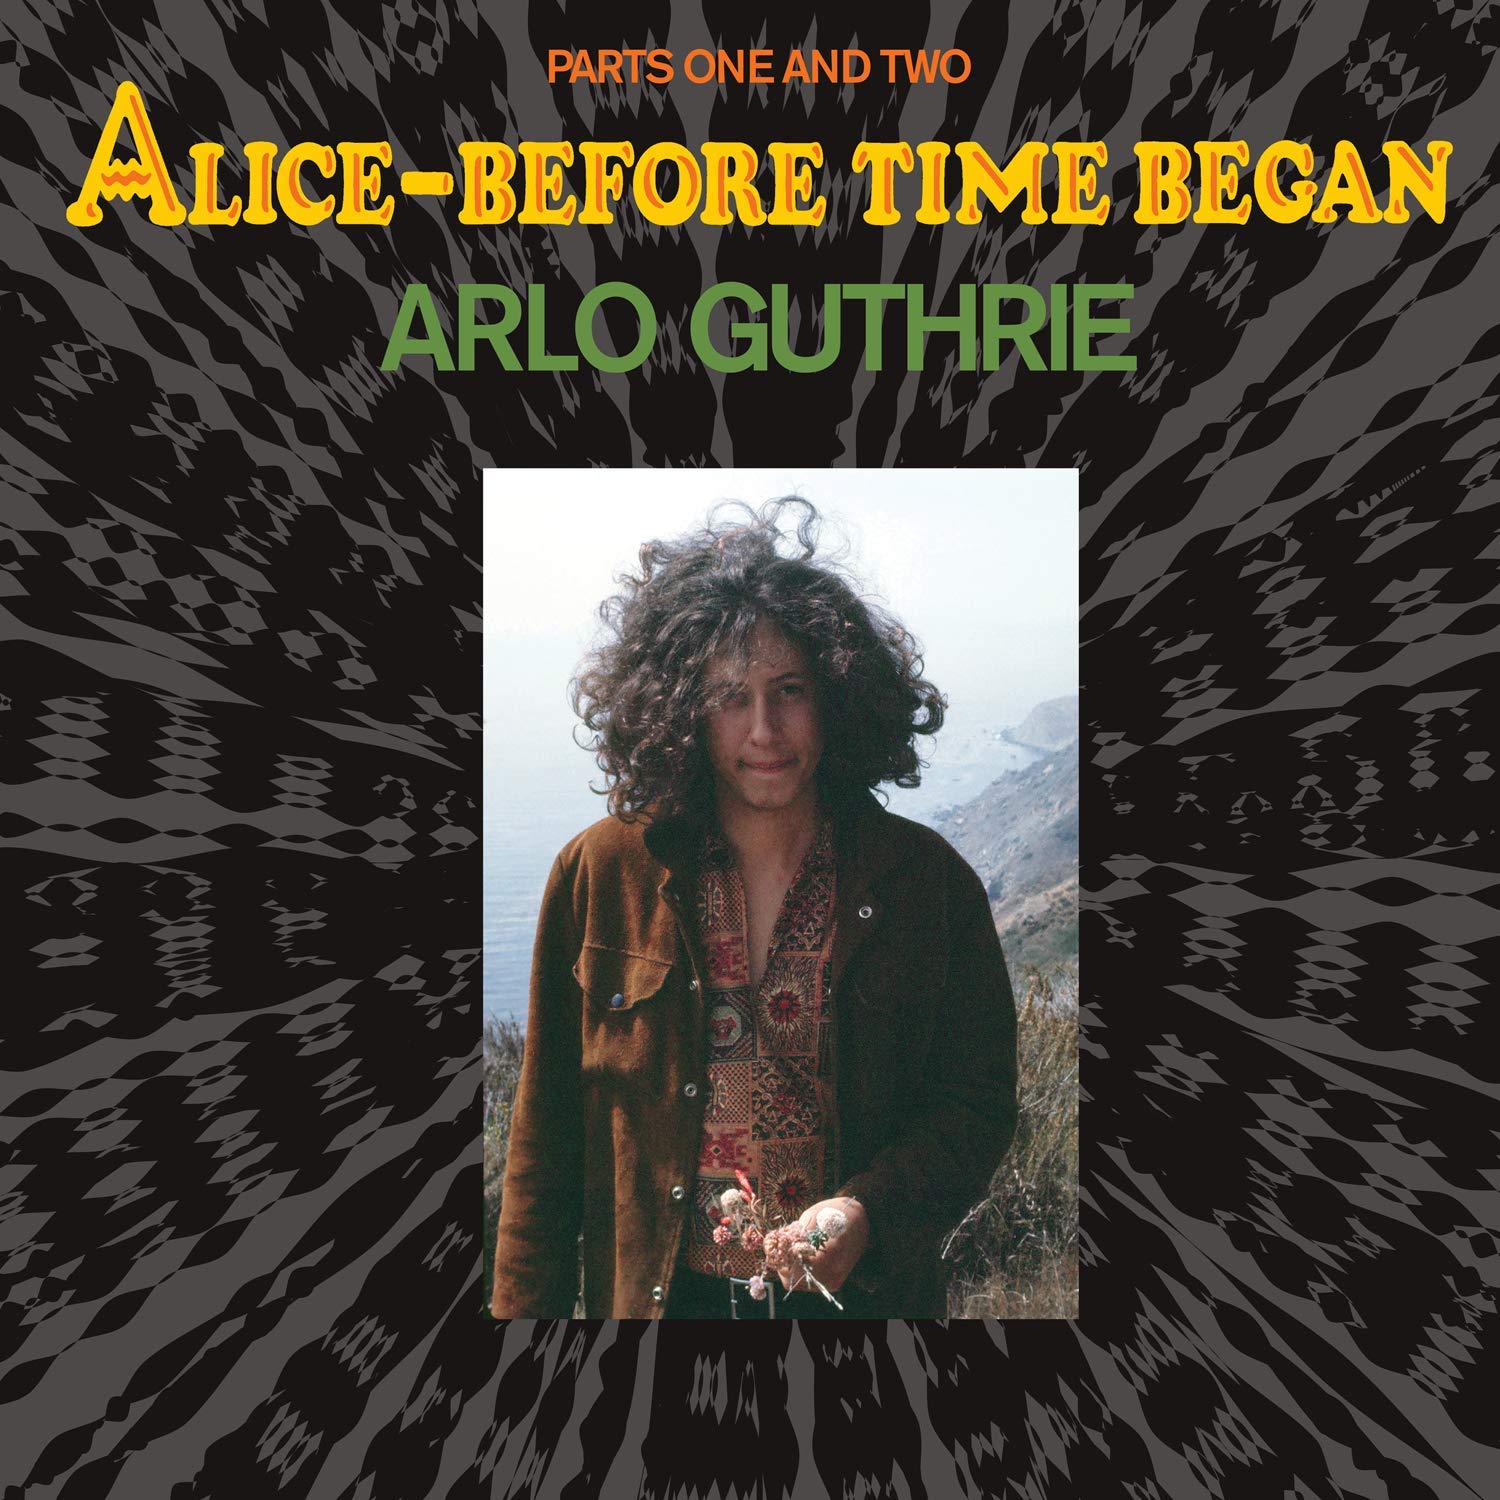 ALICE-BEFORE TIME BEGAN